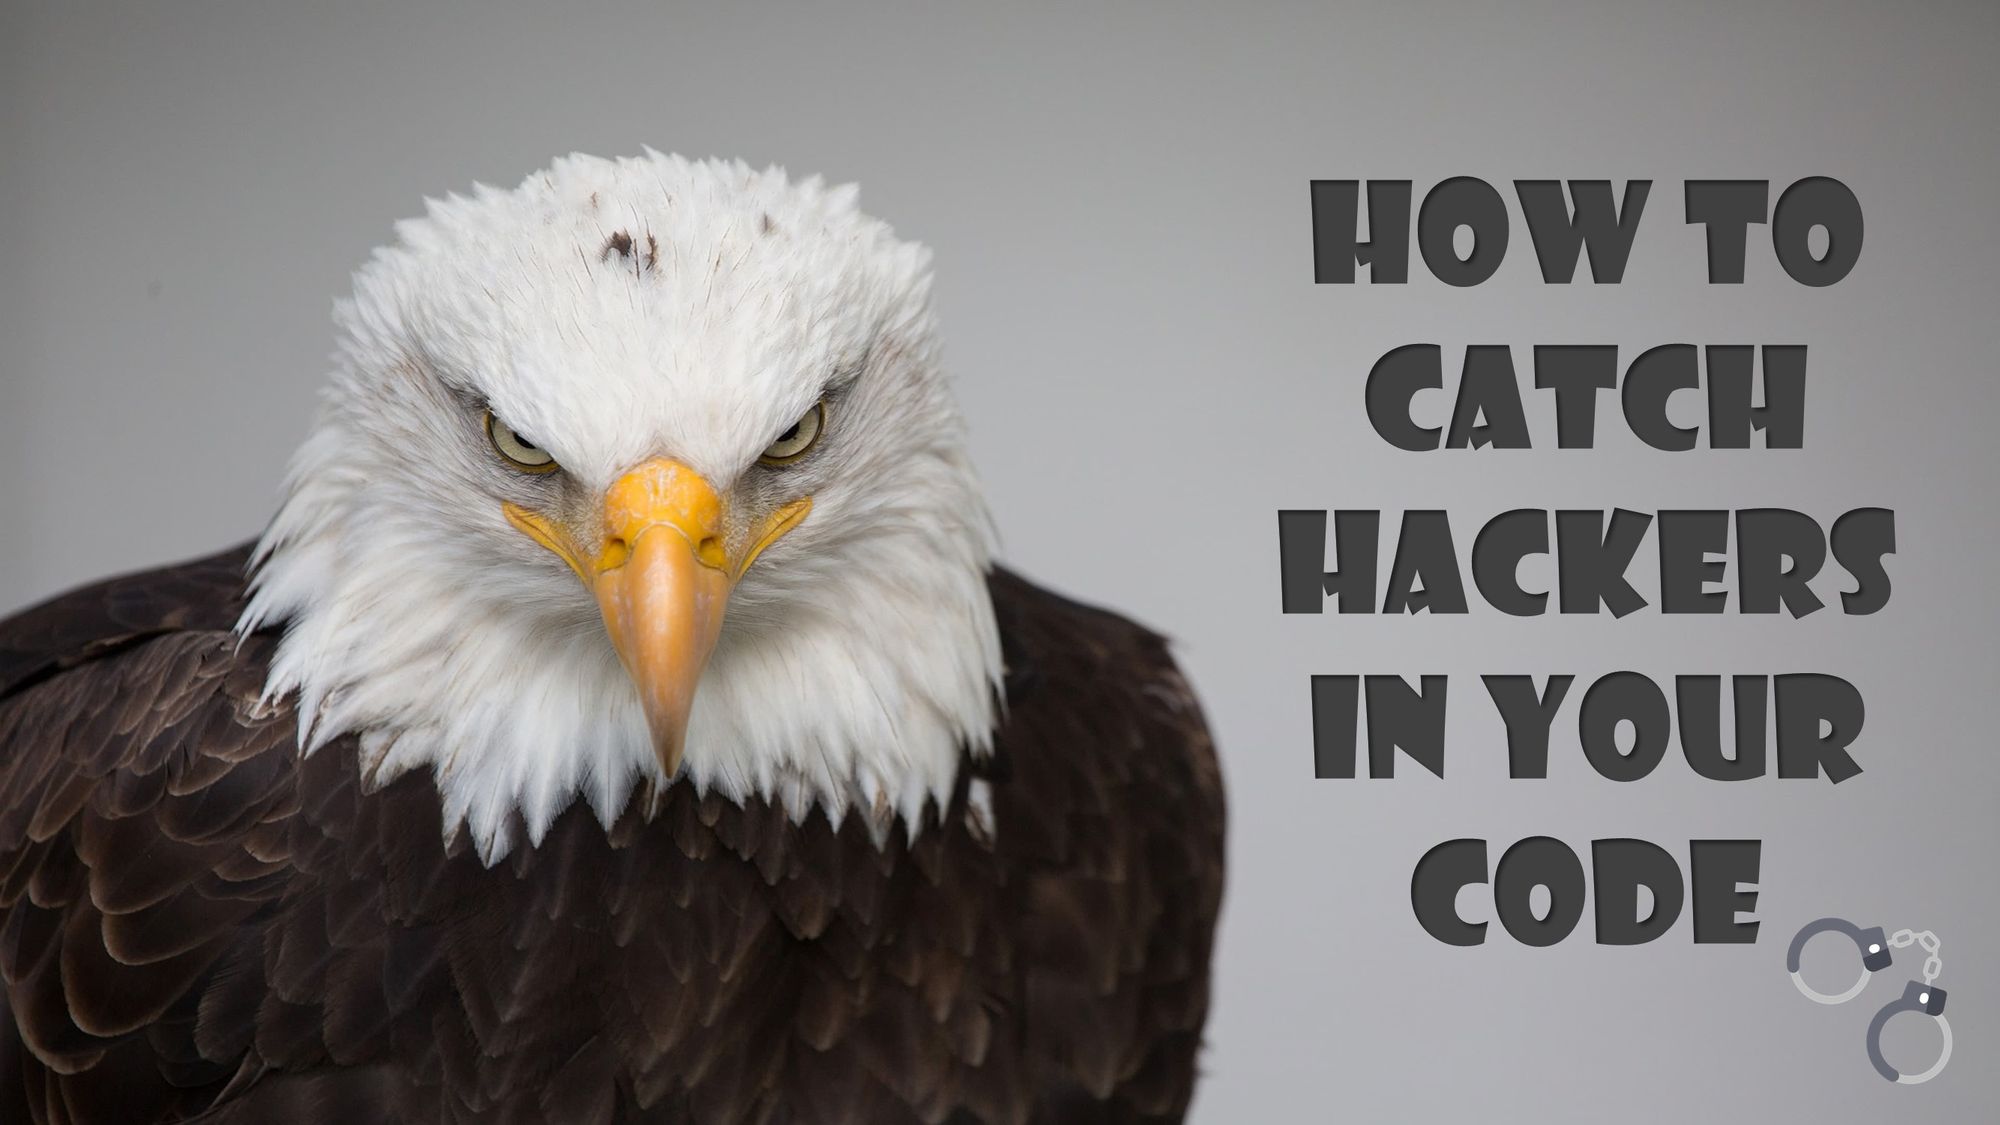 How to Catch Hackers in Your Code